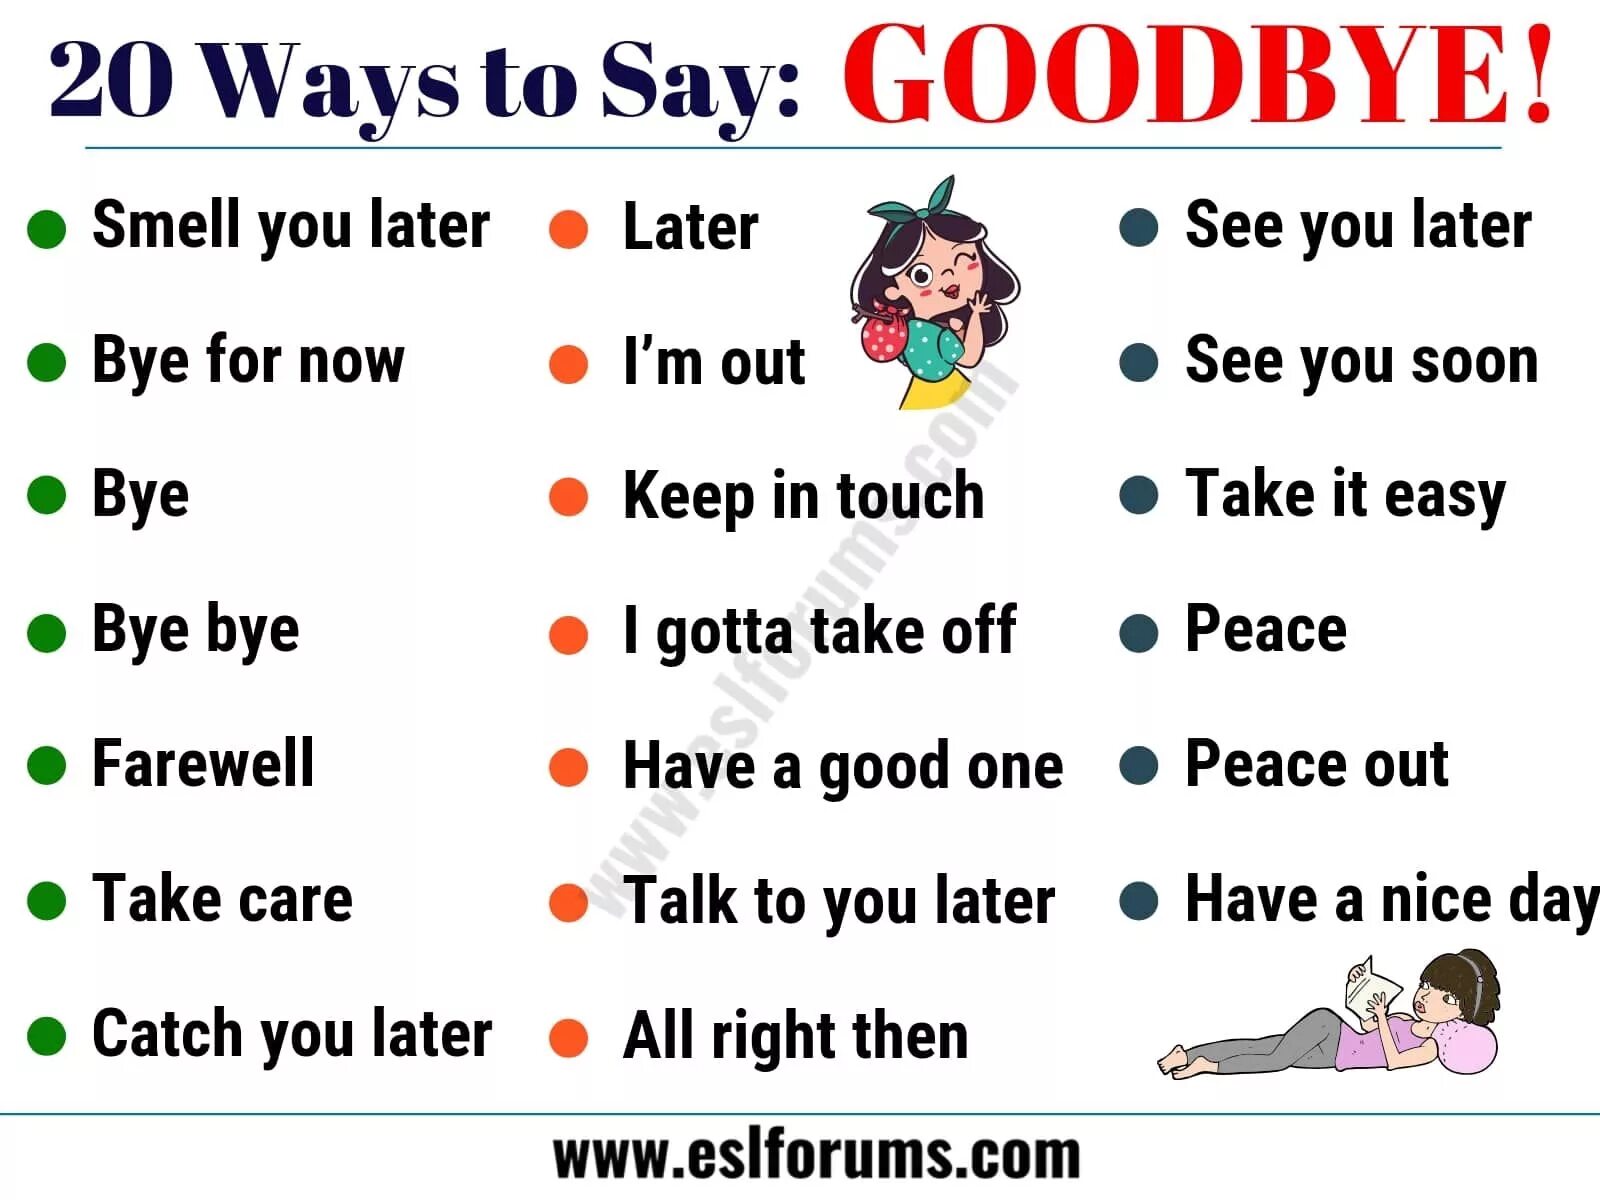 Ways to say Goodbye in English. Ways to say Bye. Ways of saying good Bye. Different ways to say Bye.